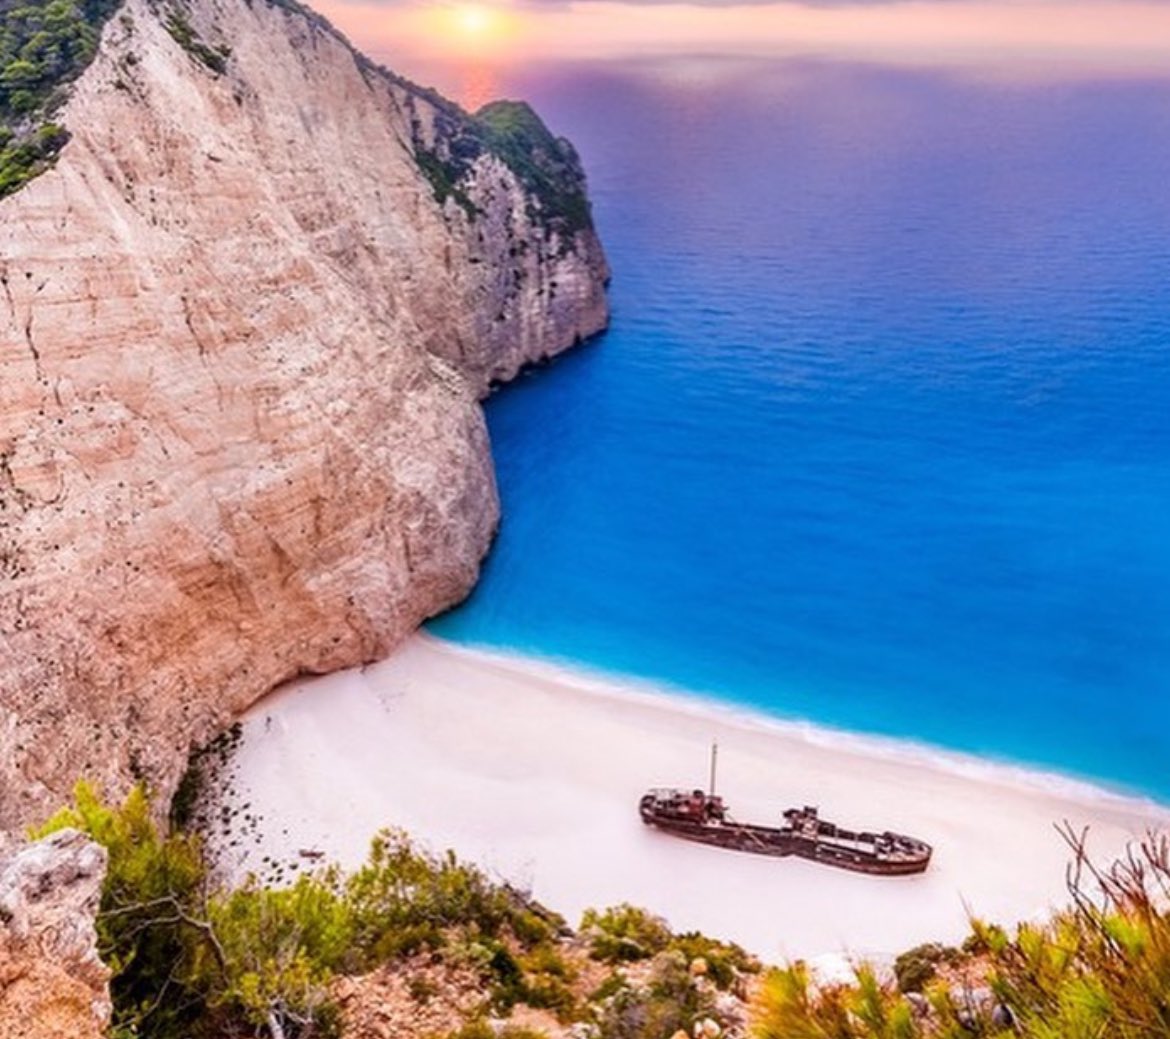 The Panagiotis is a shipwreck lying abandoned on Navagio Beach in Greece. It is a stunning island off the southwest coast of Greece, boasting magnificent beaches, secluded coves, and verdant valleys. While the island is known for its natural beauty, it is perhaps most famous